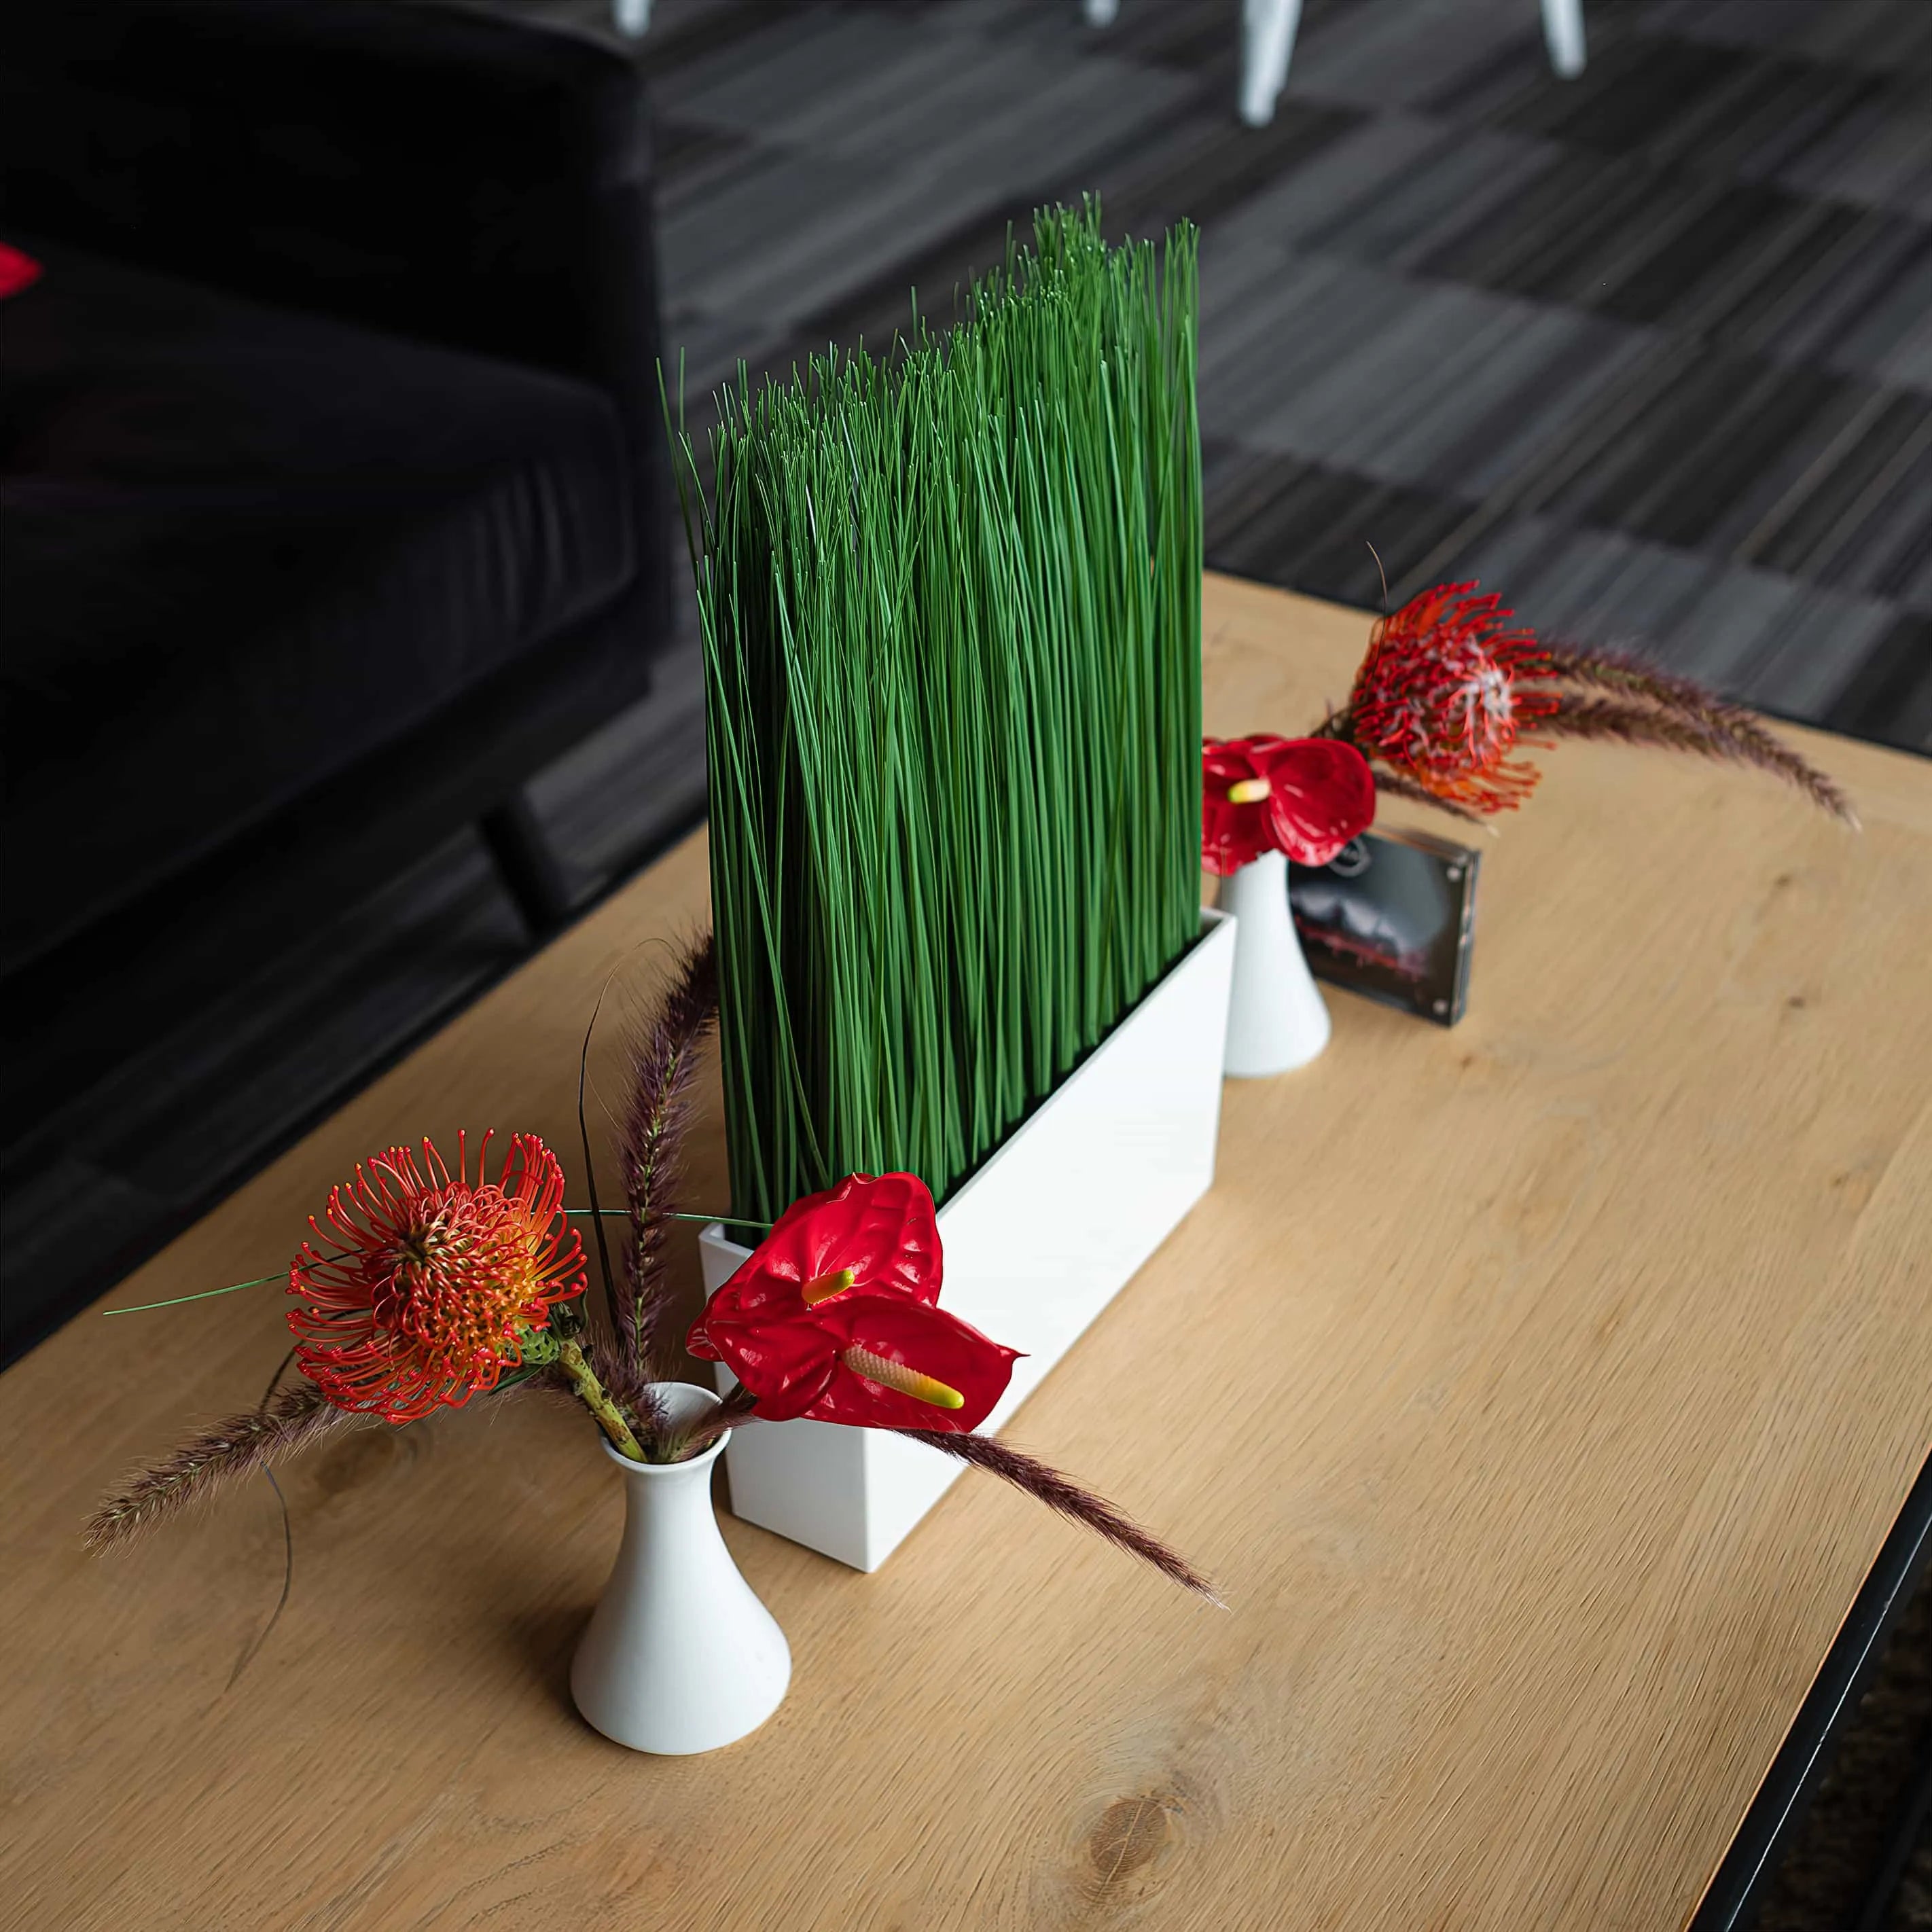 Amaranté London's innovative greenery installation, presenting tall grasses and vibrant red floral accents in minimalist vases on a wooden table, illustrating a fusion of nature and modern design at the Formula E Word Championship Event, in the lounge area.